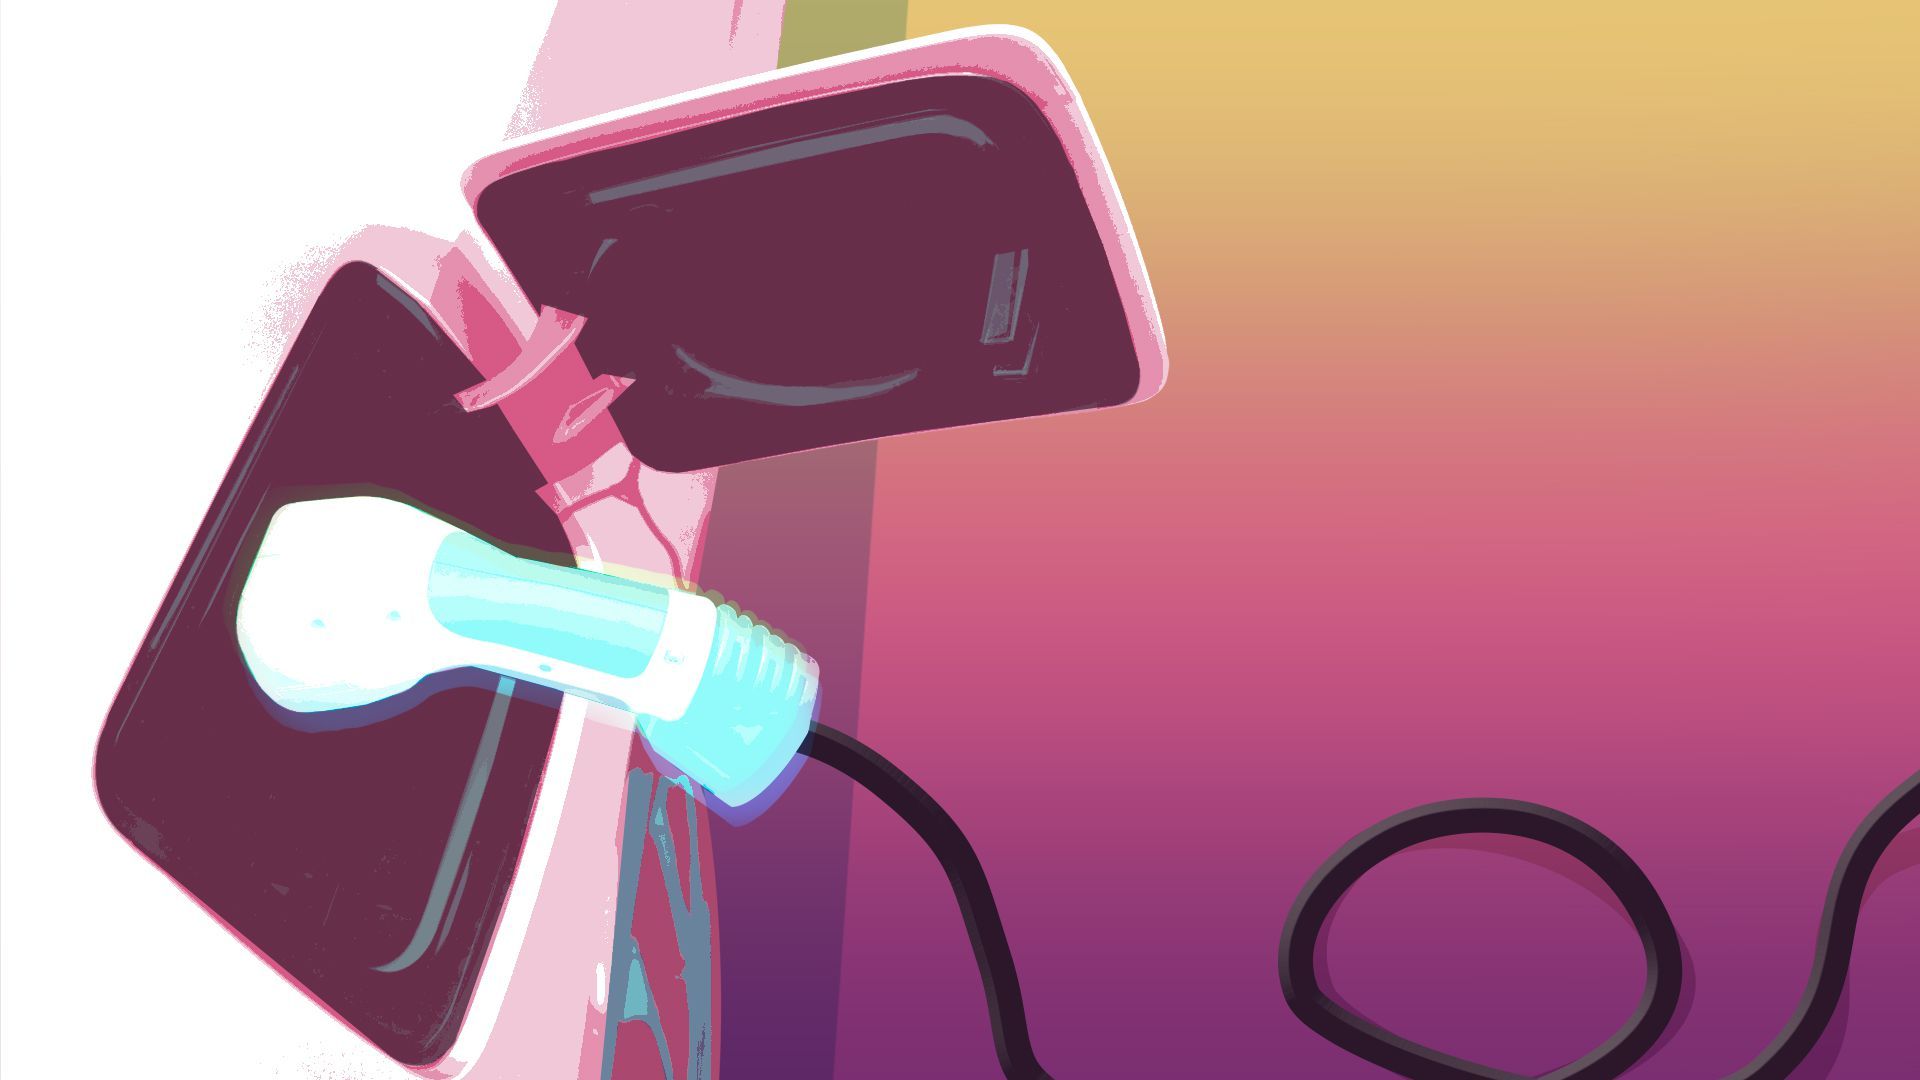 Illustration of a EV charger in a car